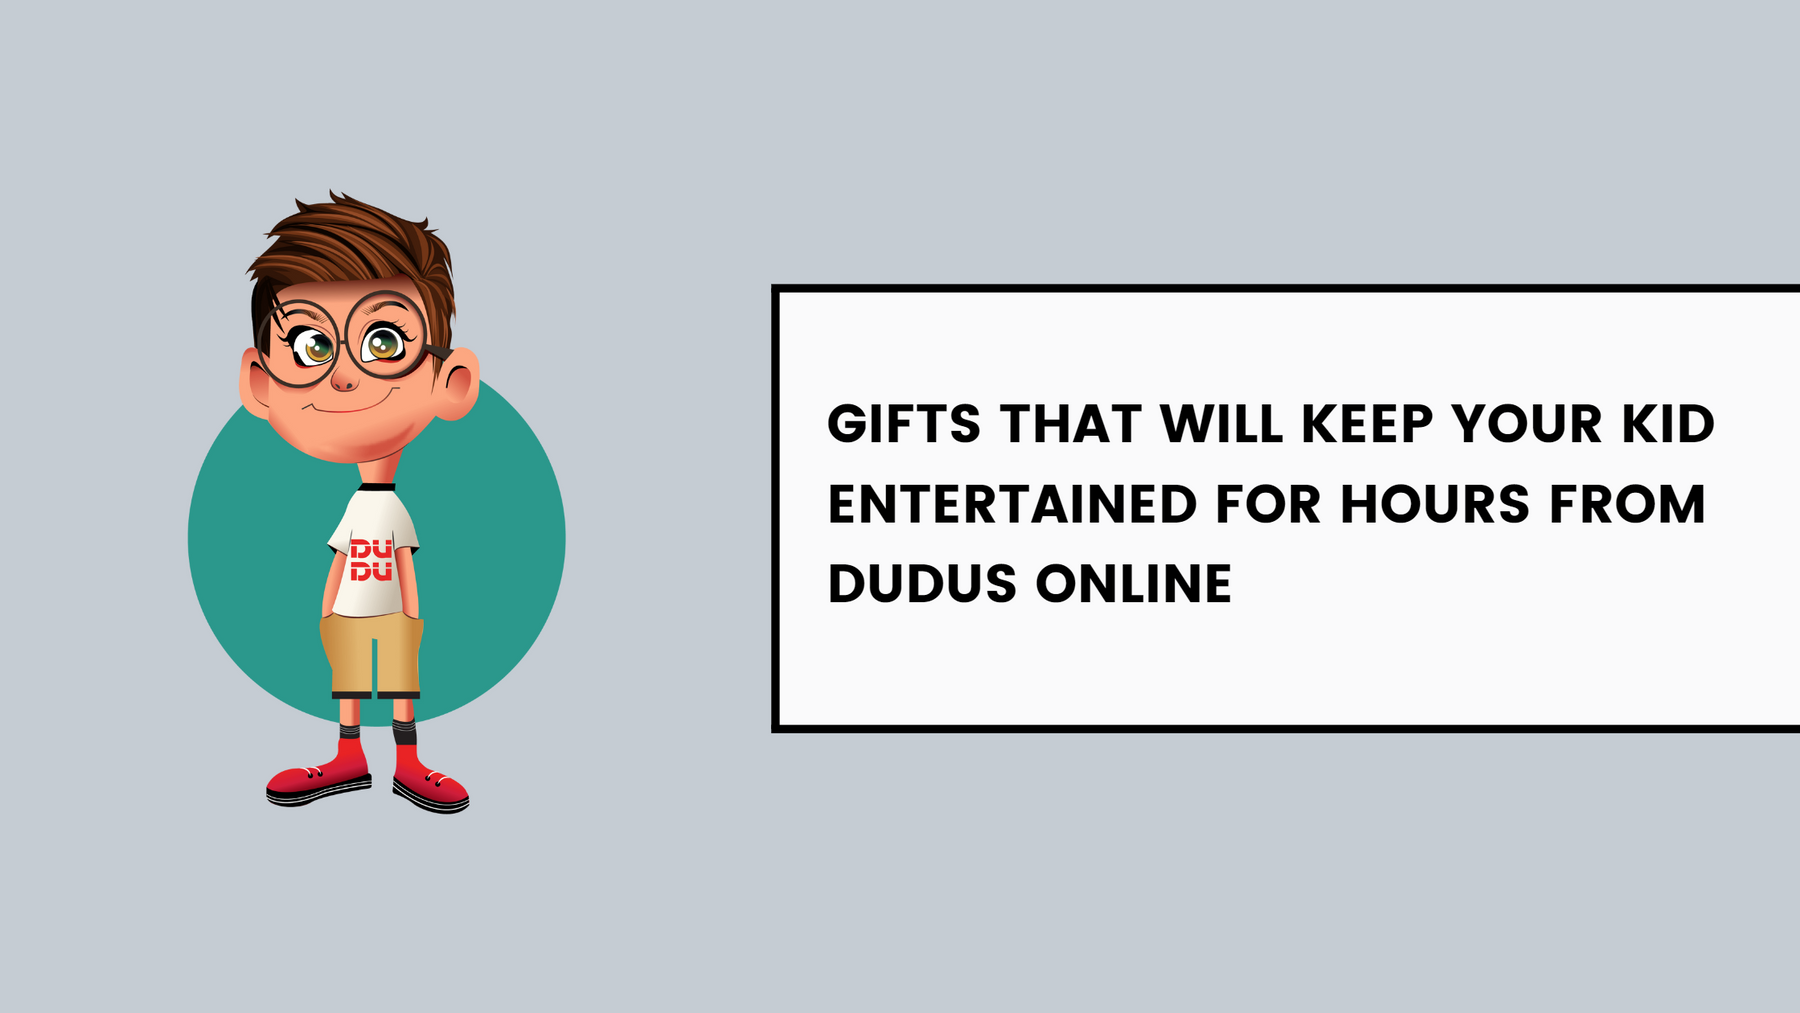 Gifts That Will Keep Your Kid Entertained For Hours From Dudus Online